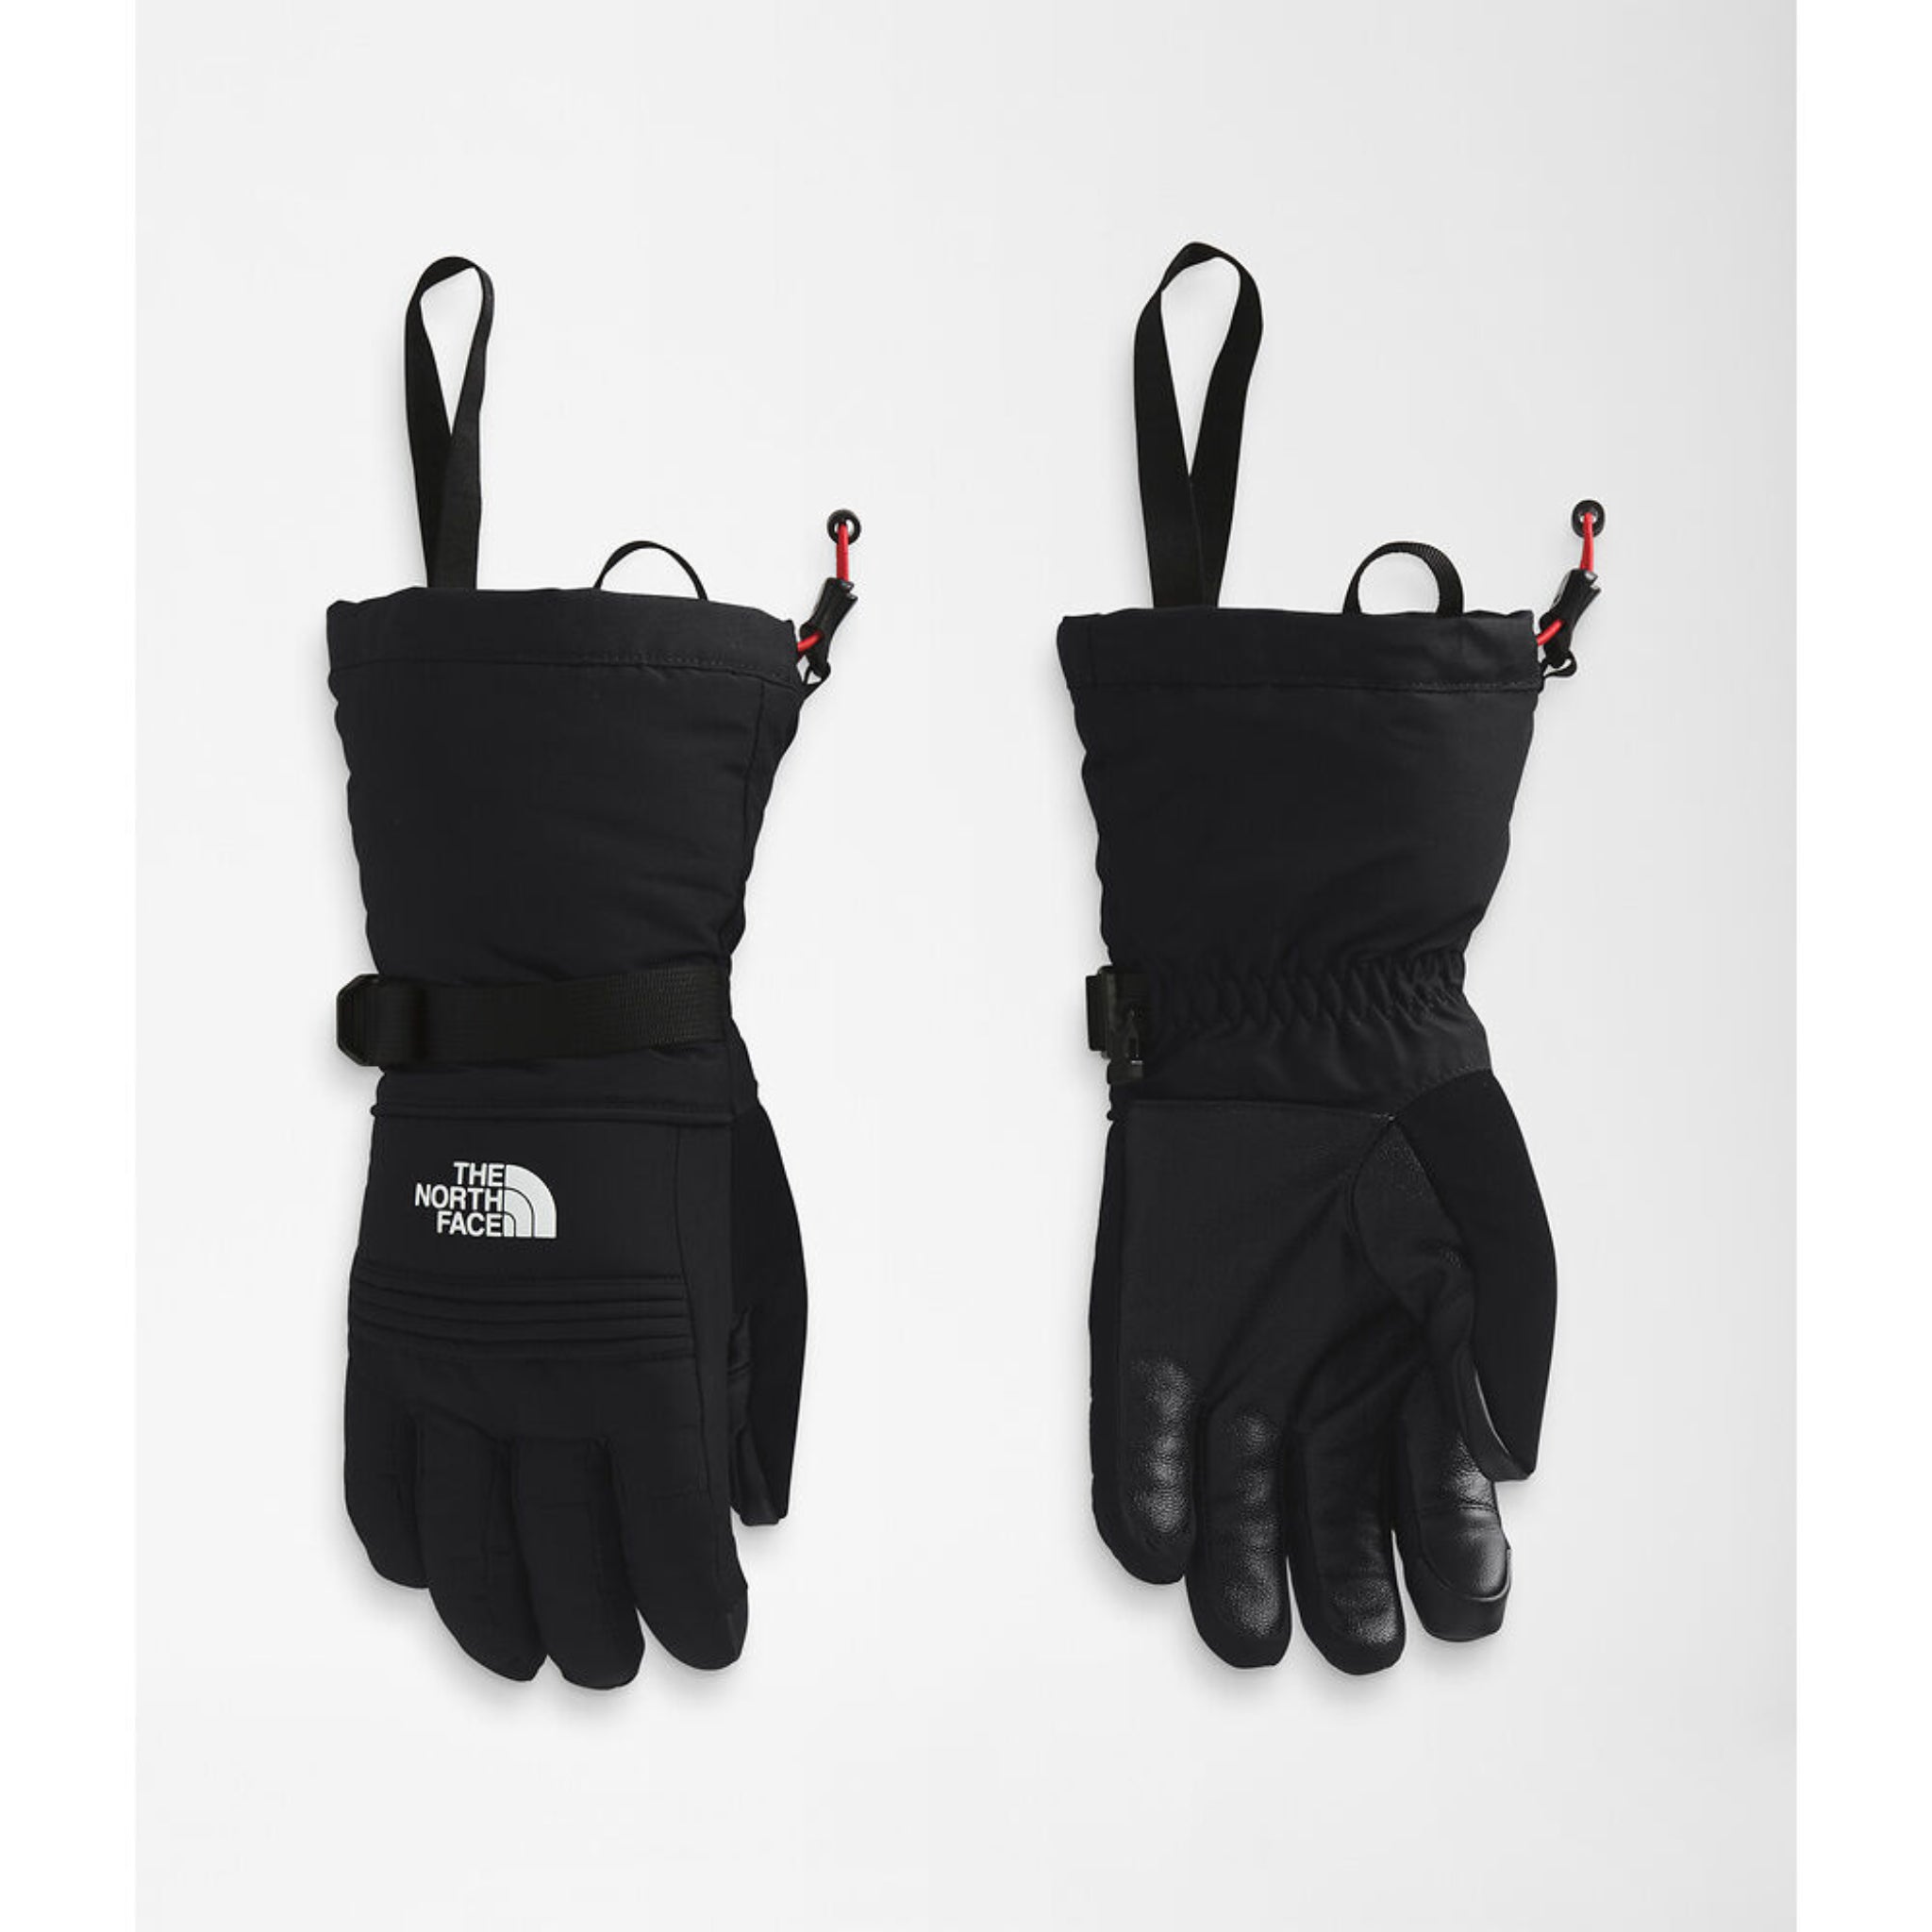 The North Face Womens Montana Glove